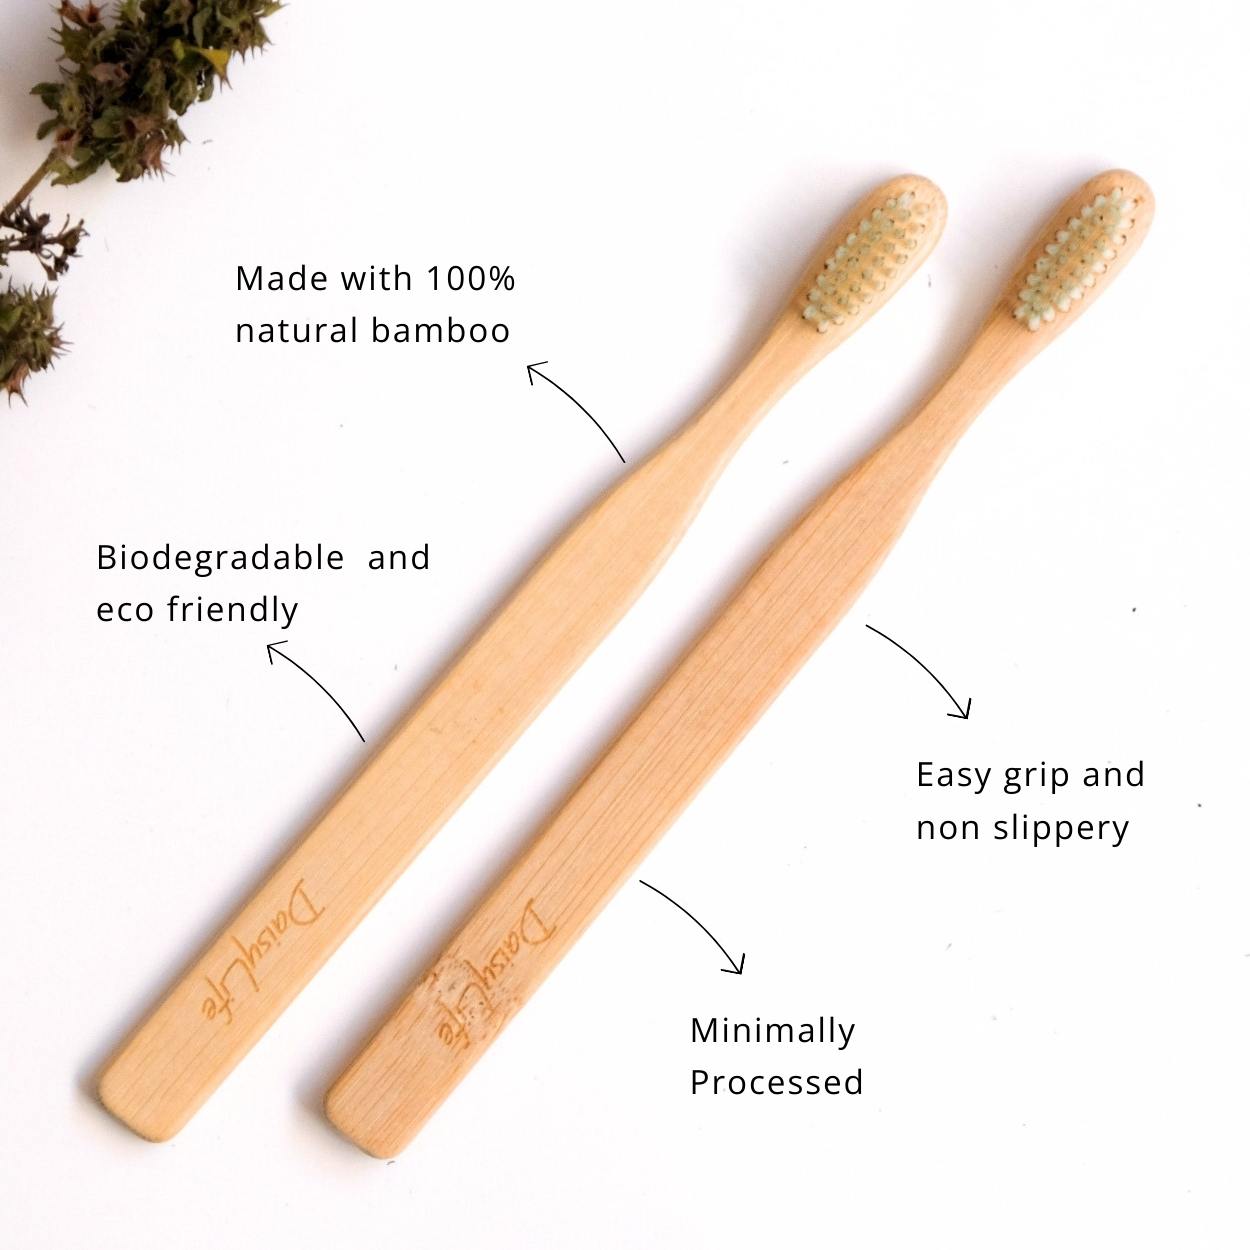 DAISYLIFE Natural Color and Eco-friendly wooden BRUSH